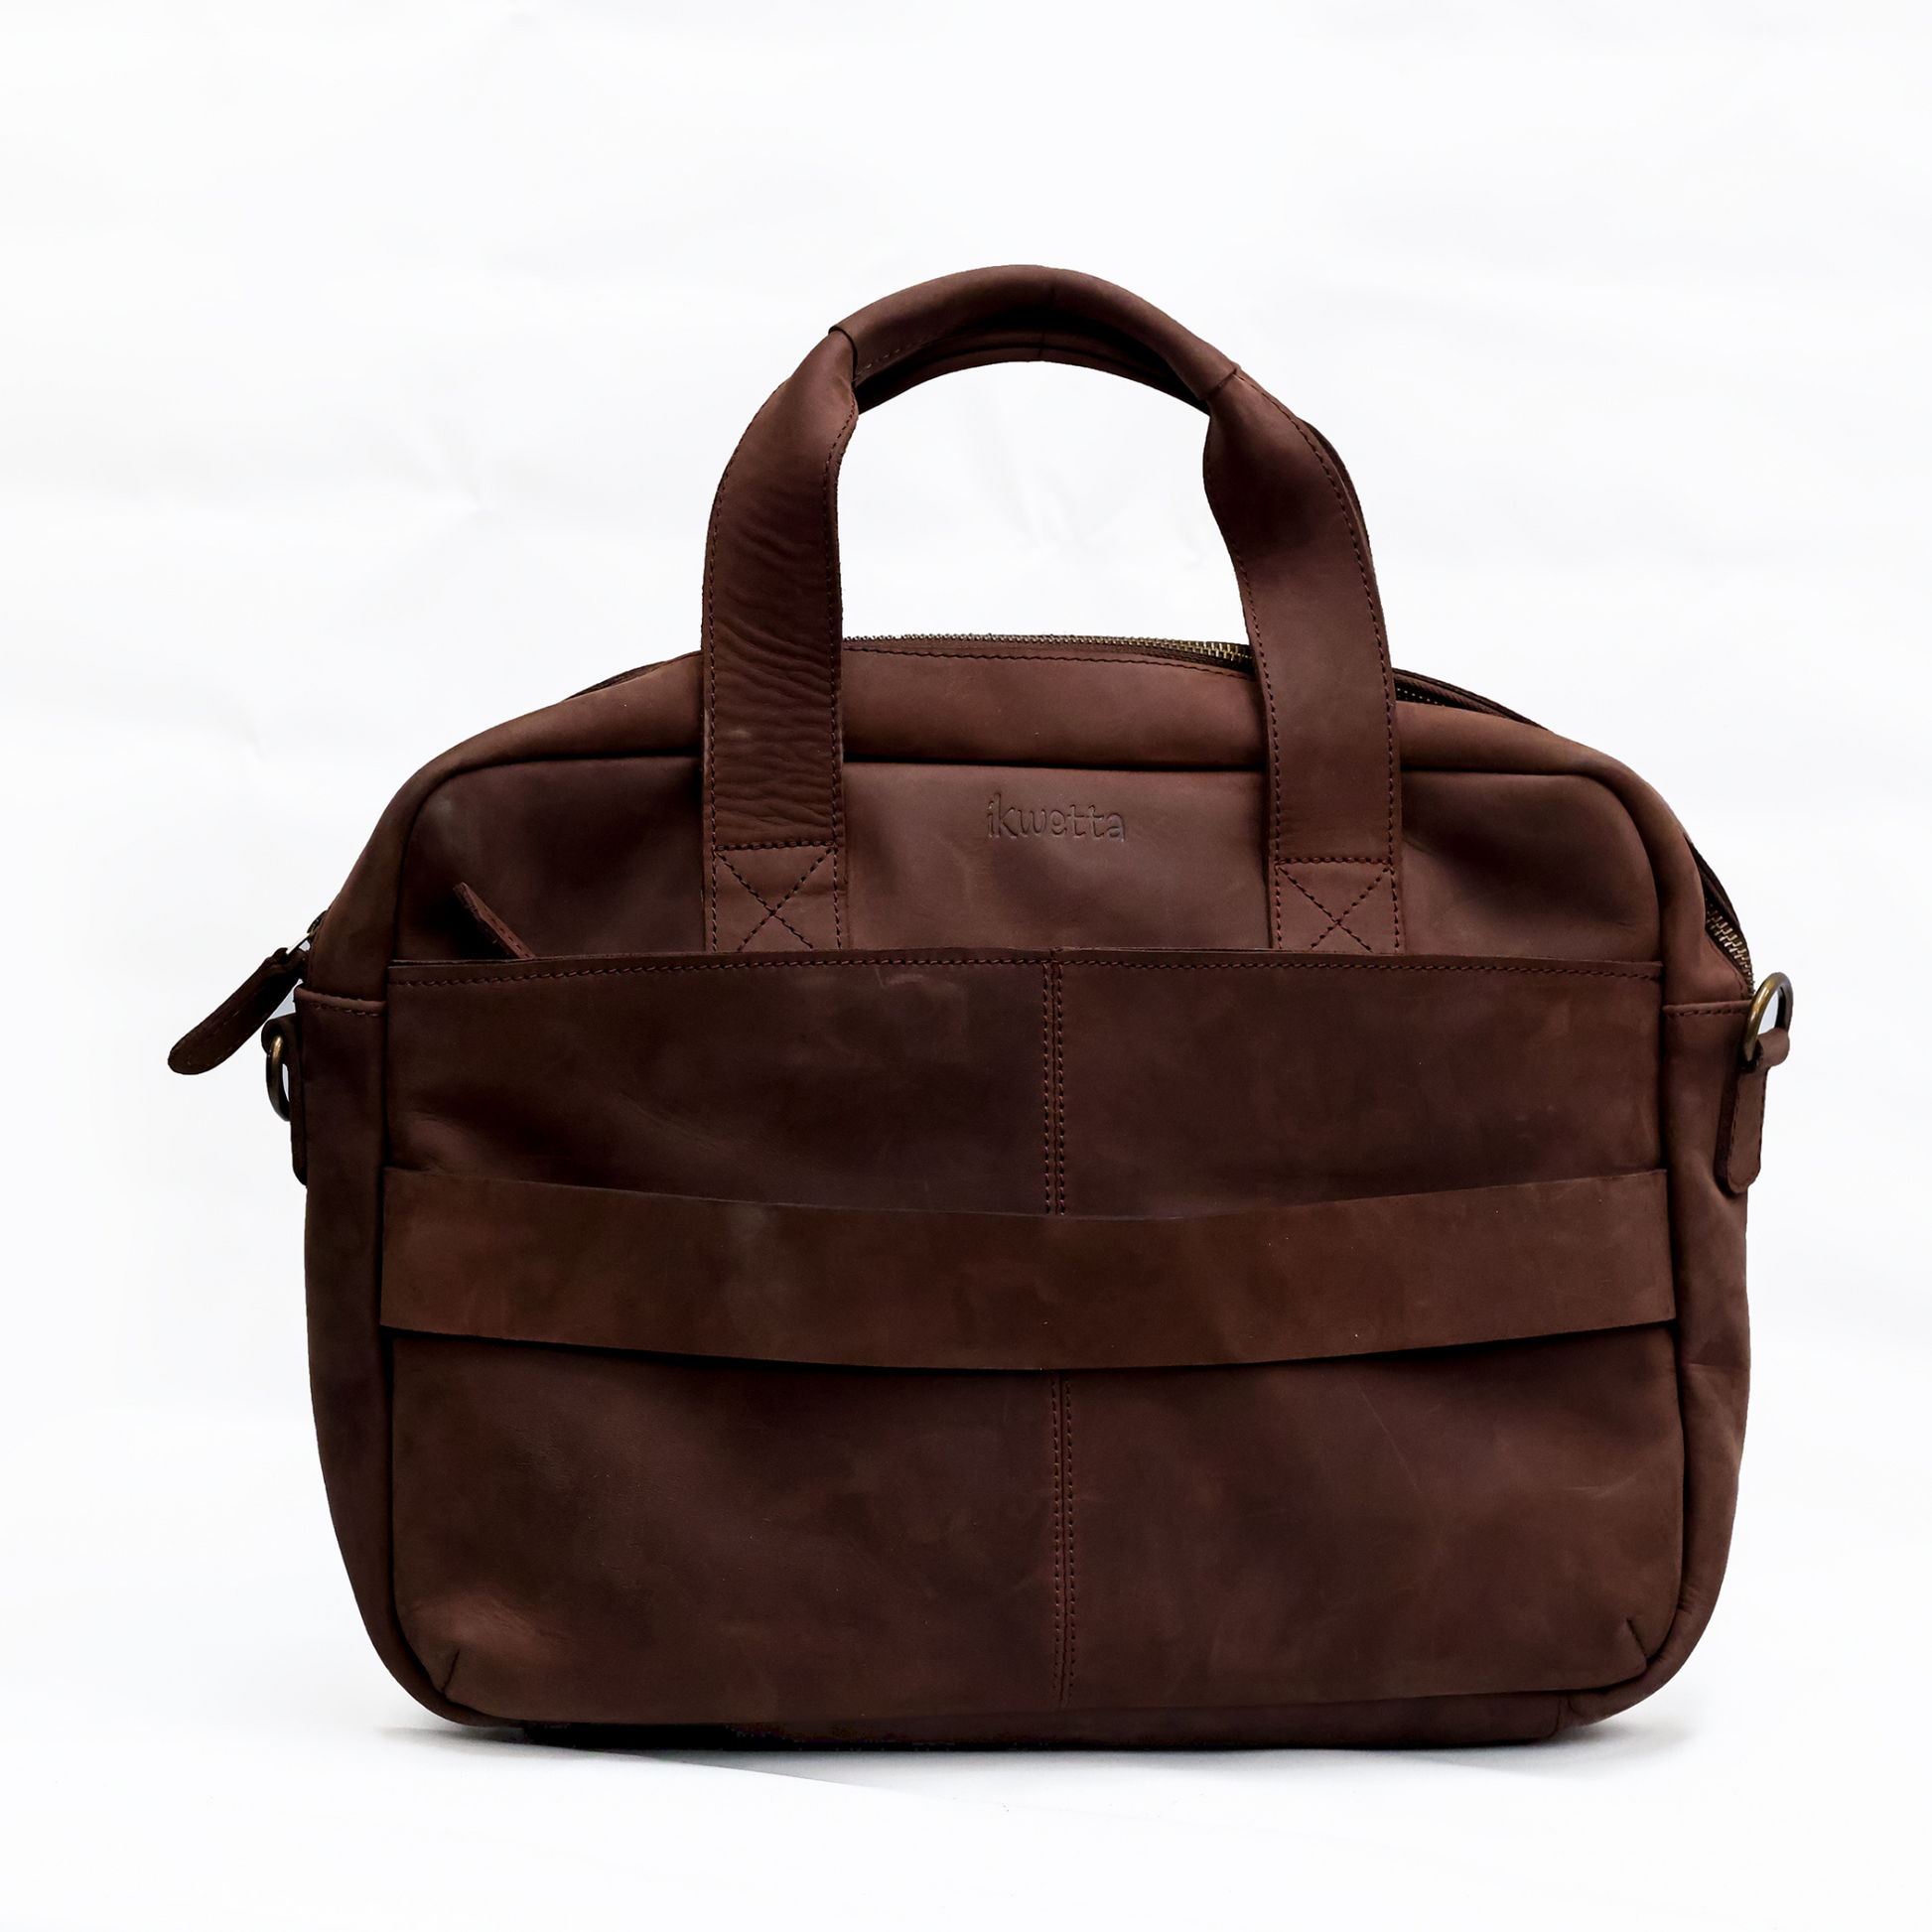 Luxcon messenger bag in mocca oil pull up leather